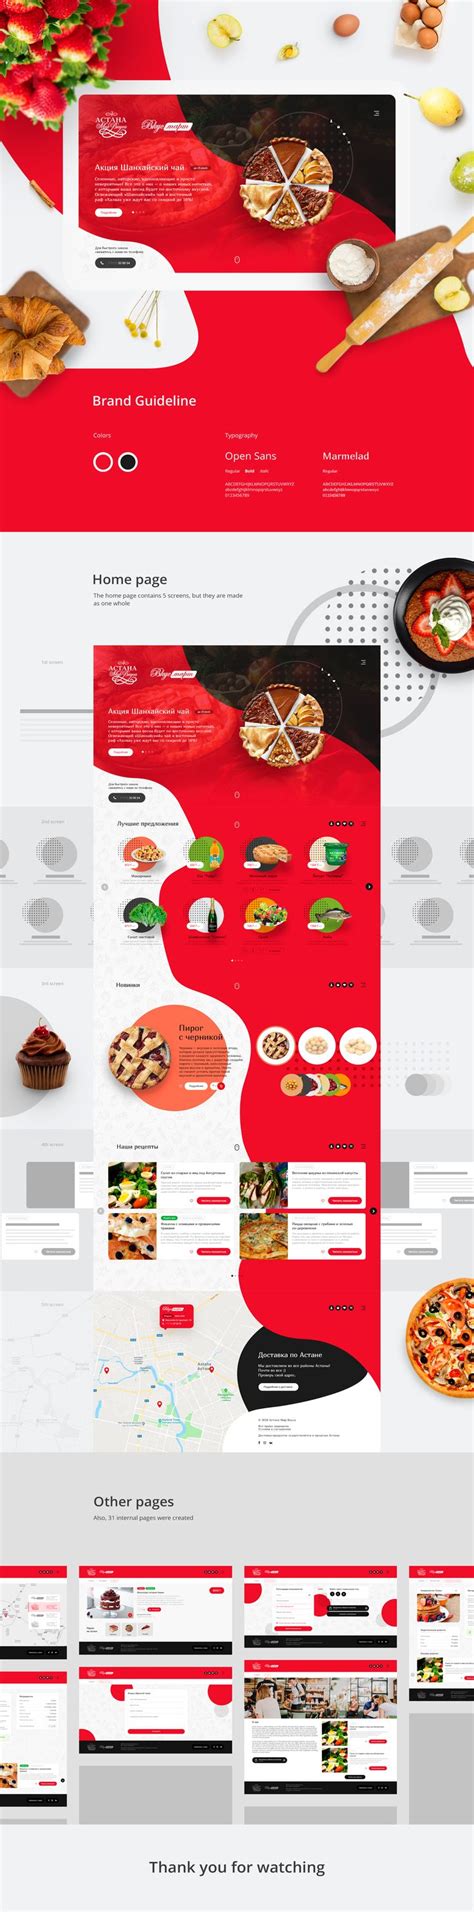 Food Infographic Check Out This Behance Project “food Shop Website